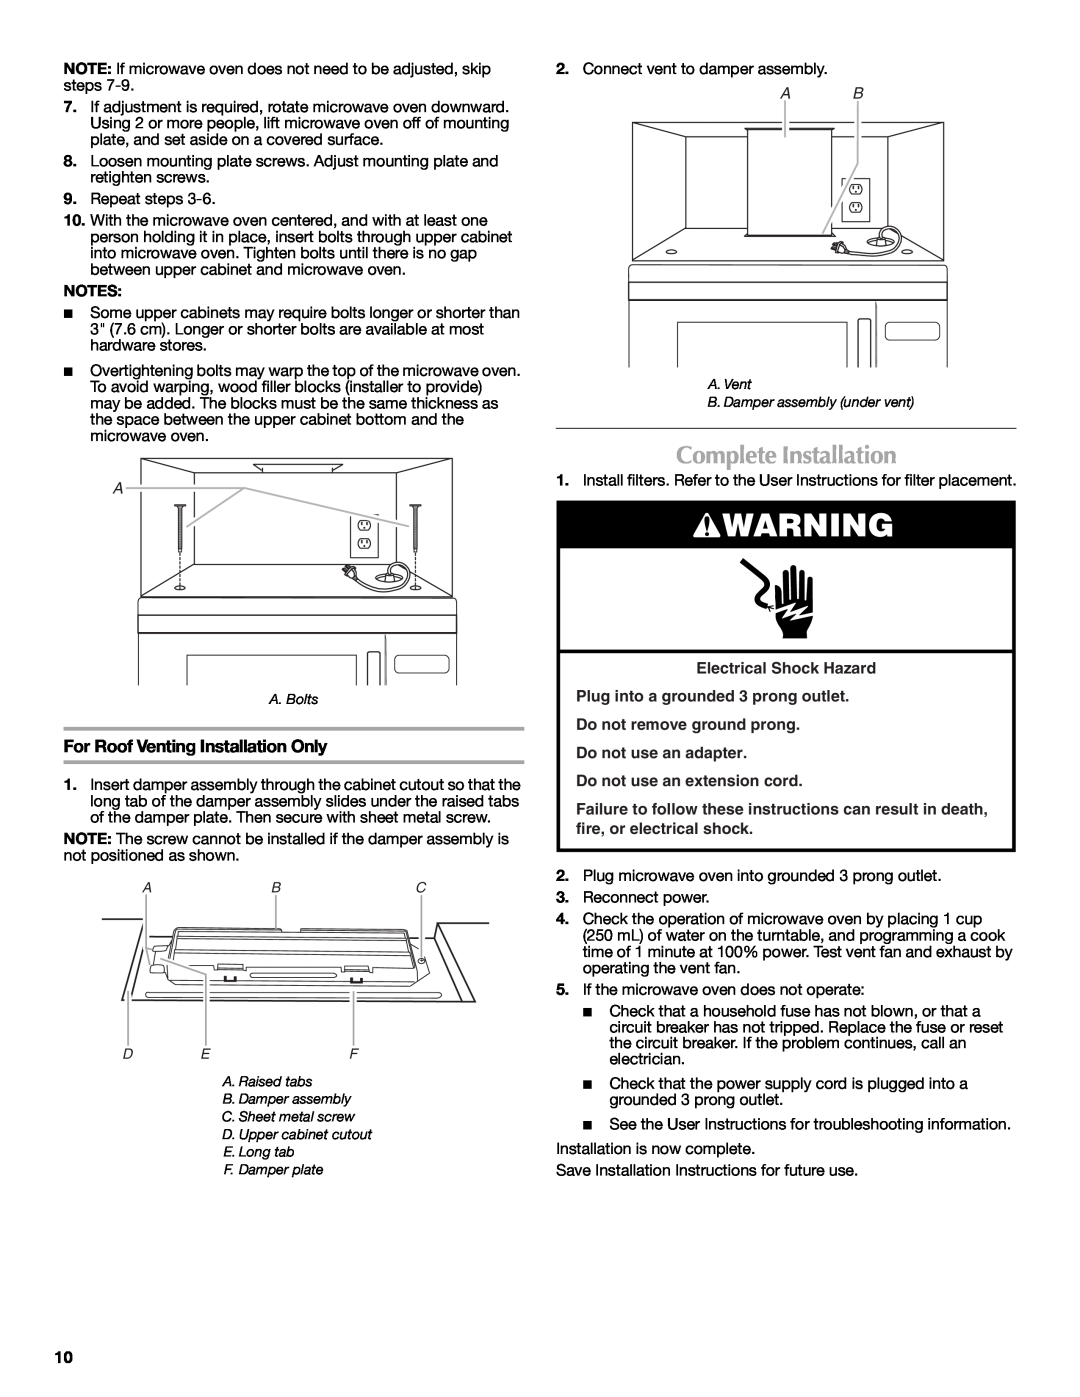 Maytag MMV5208WS Complete Installation, For Roof Venting Installation Only, Do not use an extension cord 